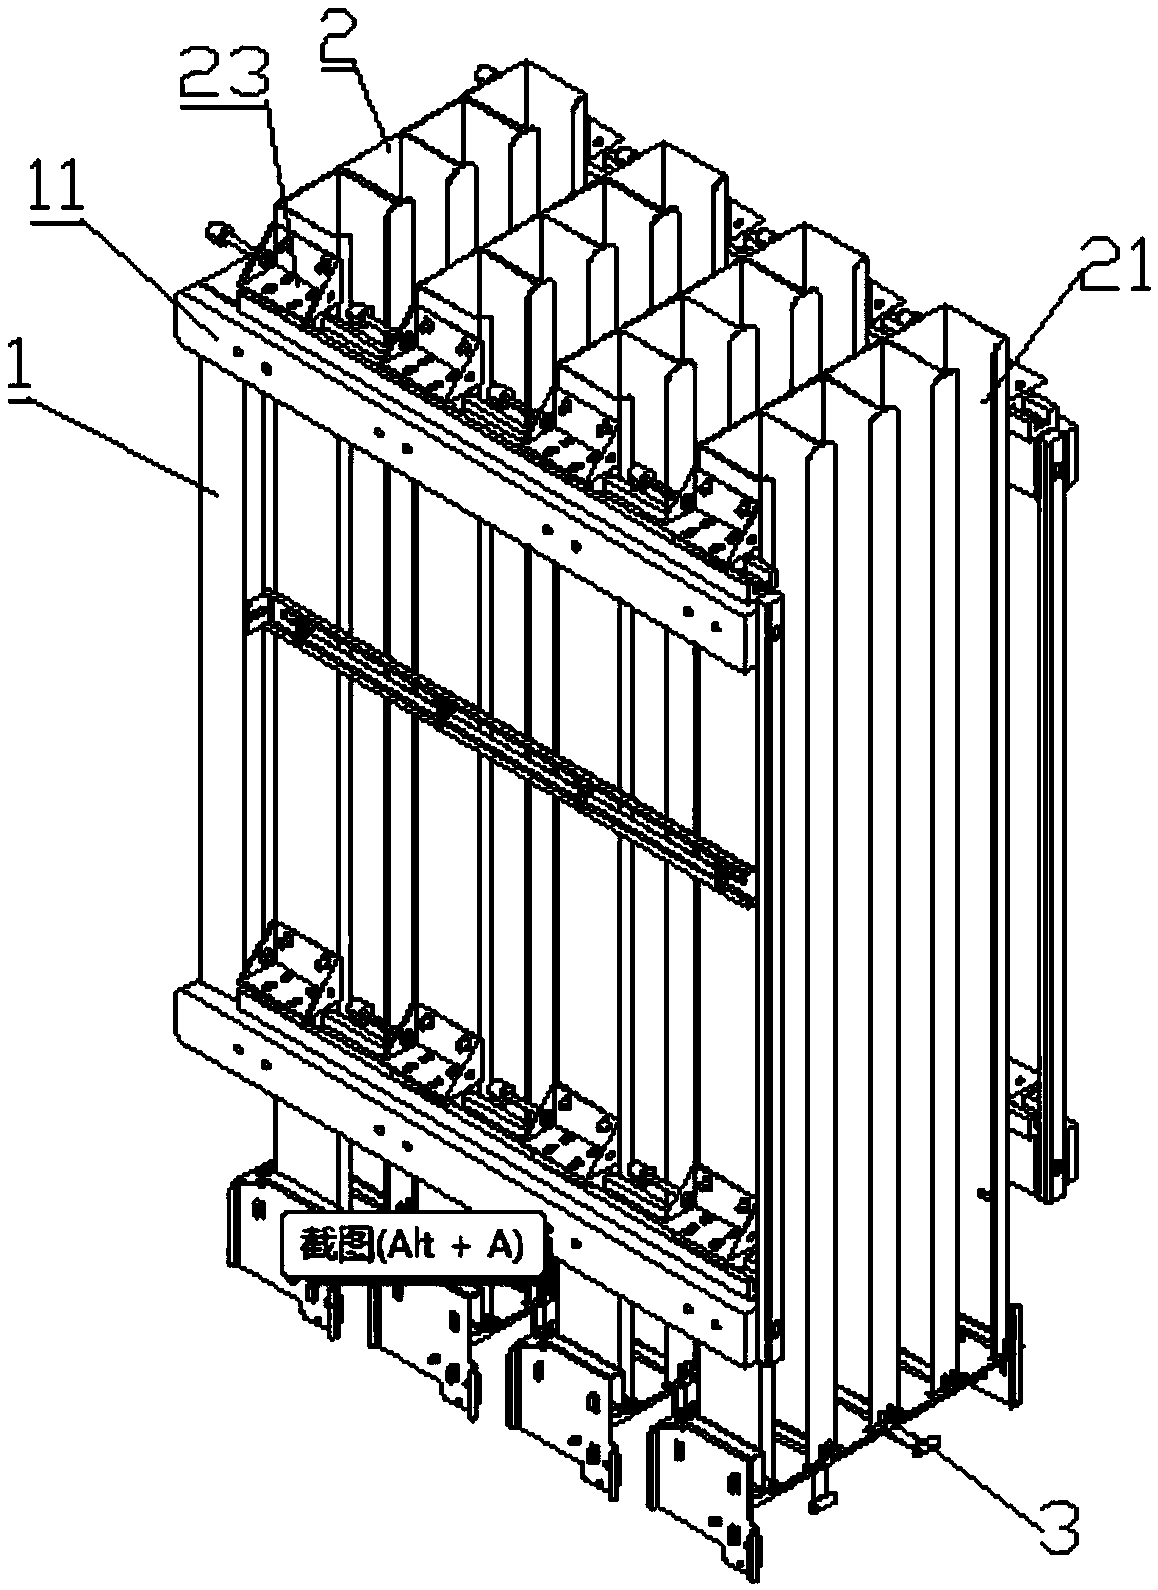 Self-service delivery cabinet with linkage self-checking function